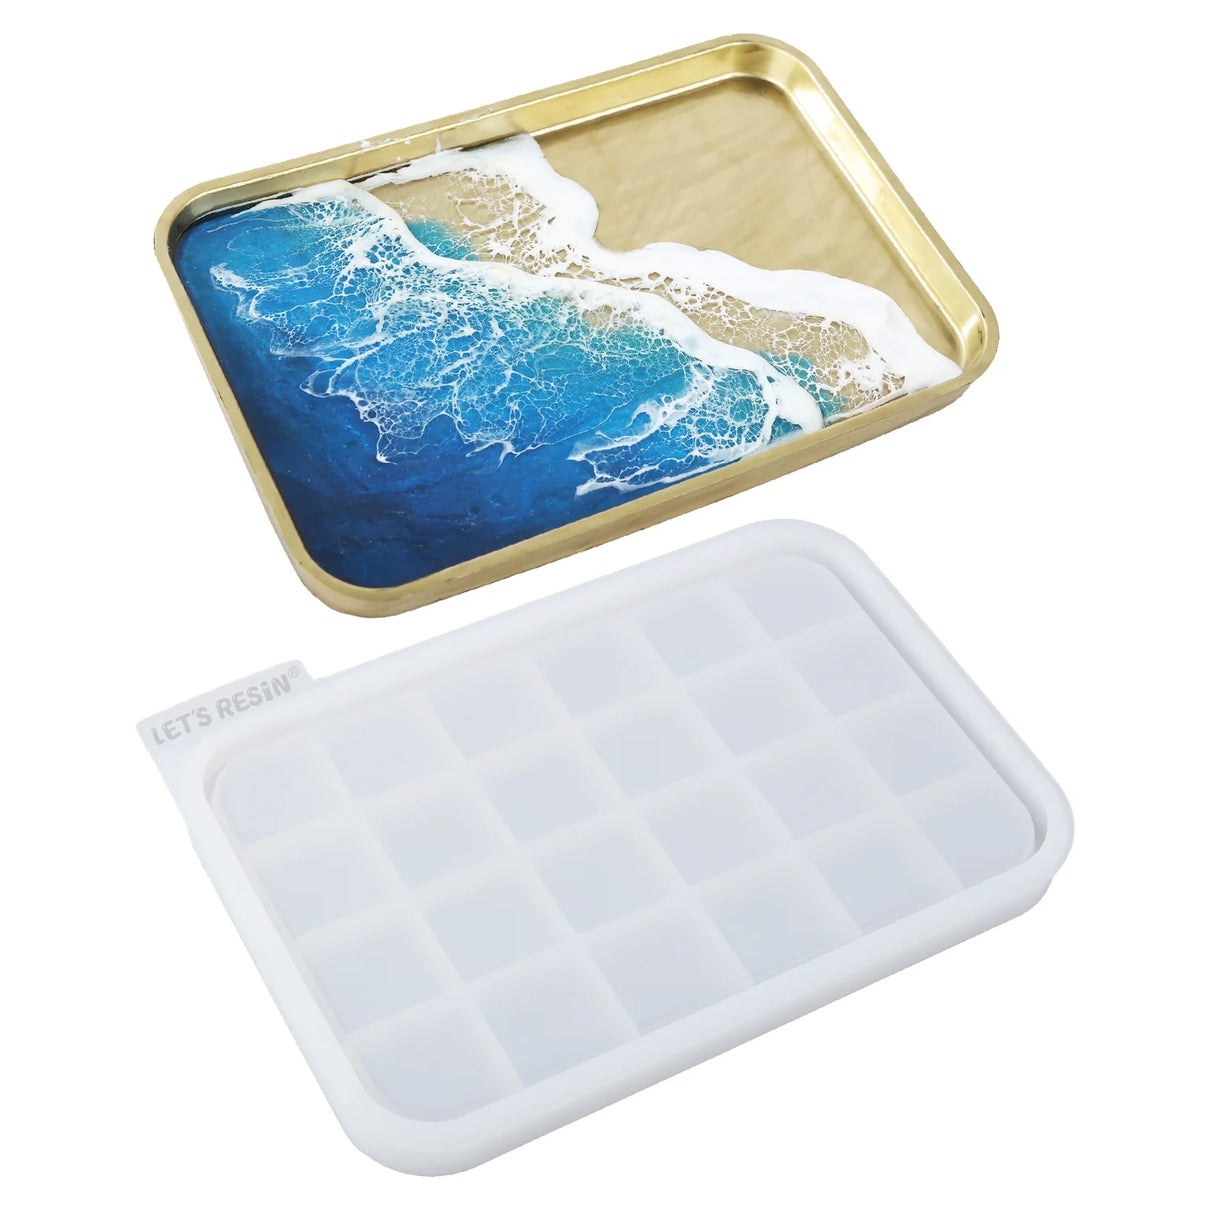 Resin Silicone Mold - Tray with Edges